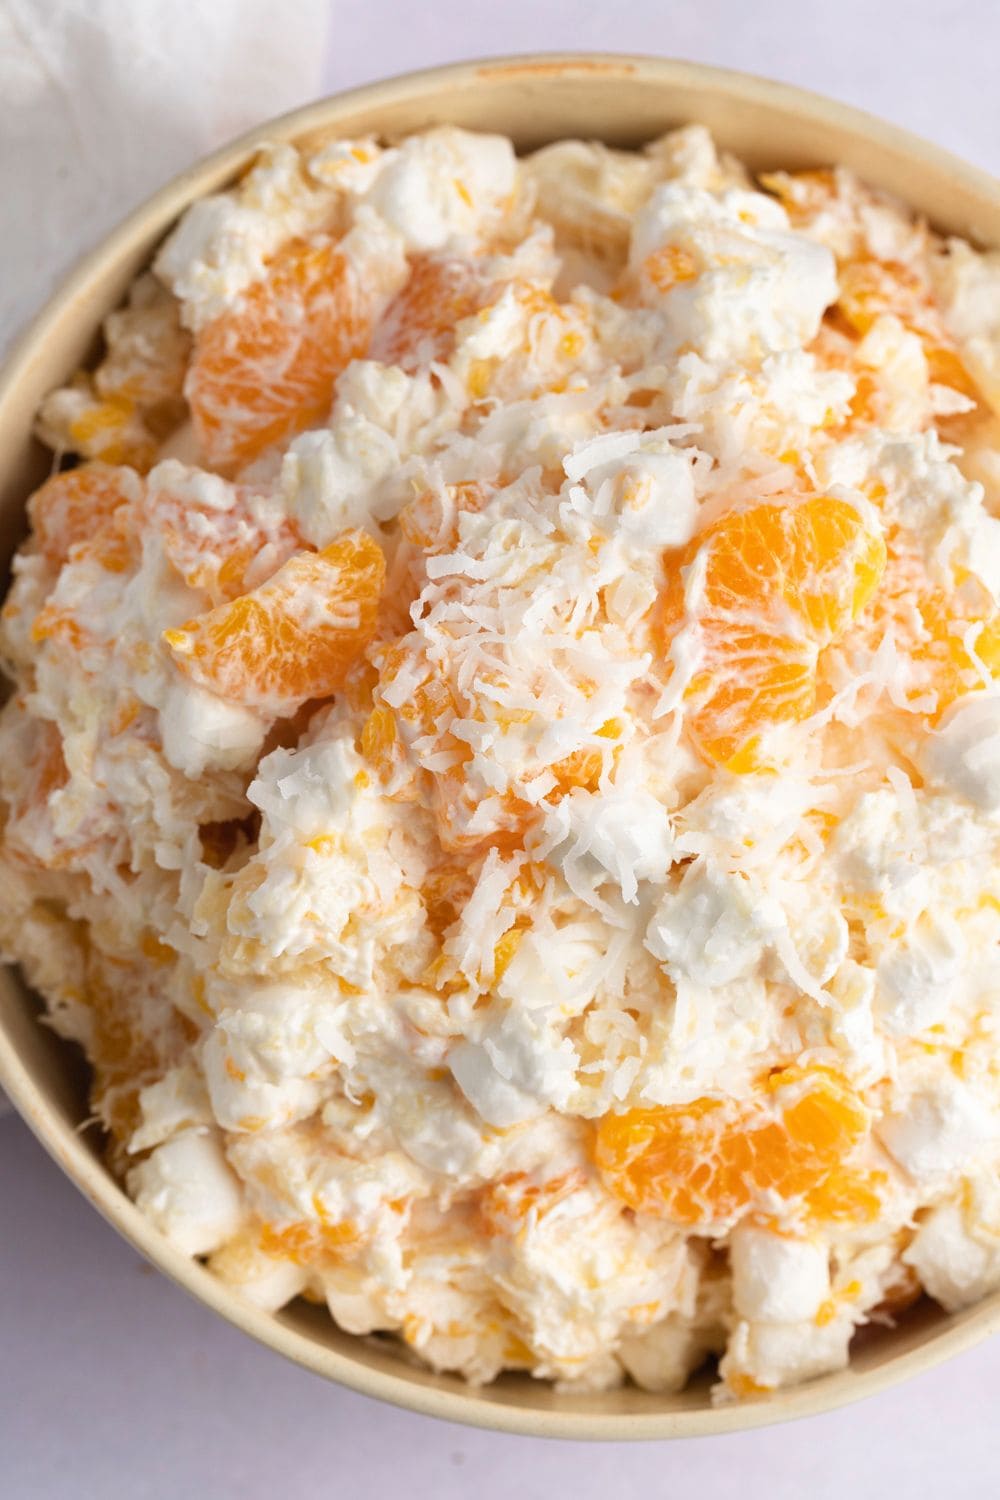 Bowl of salad made with crushed pineapple, mandarin oranges, whipped topping, marshmallows, and shredded coconut